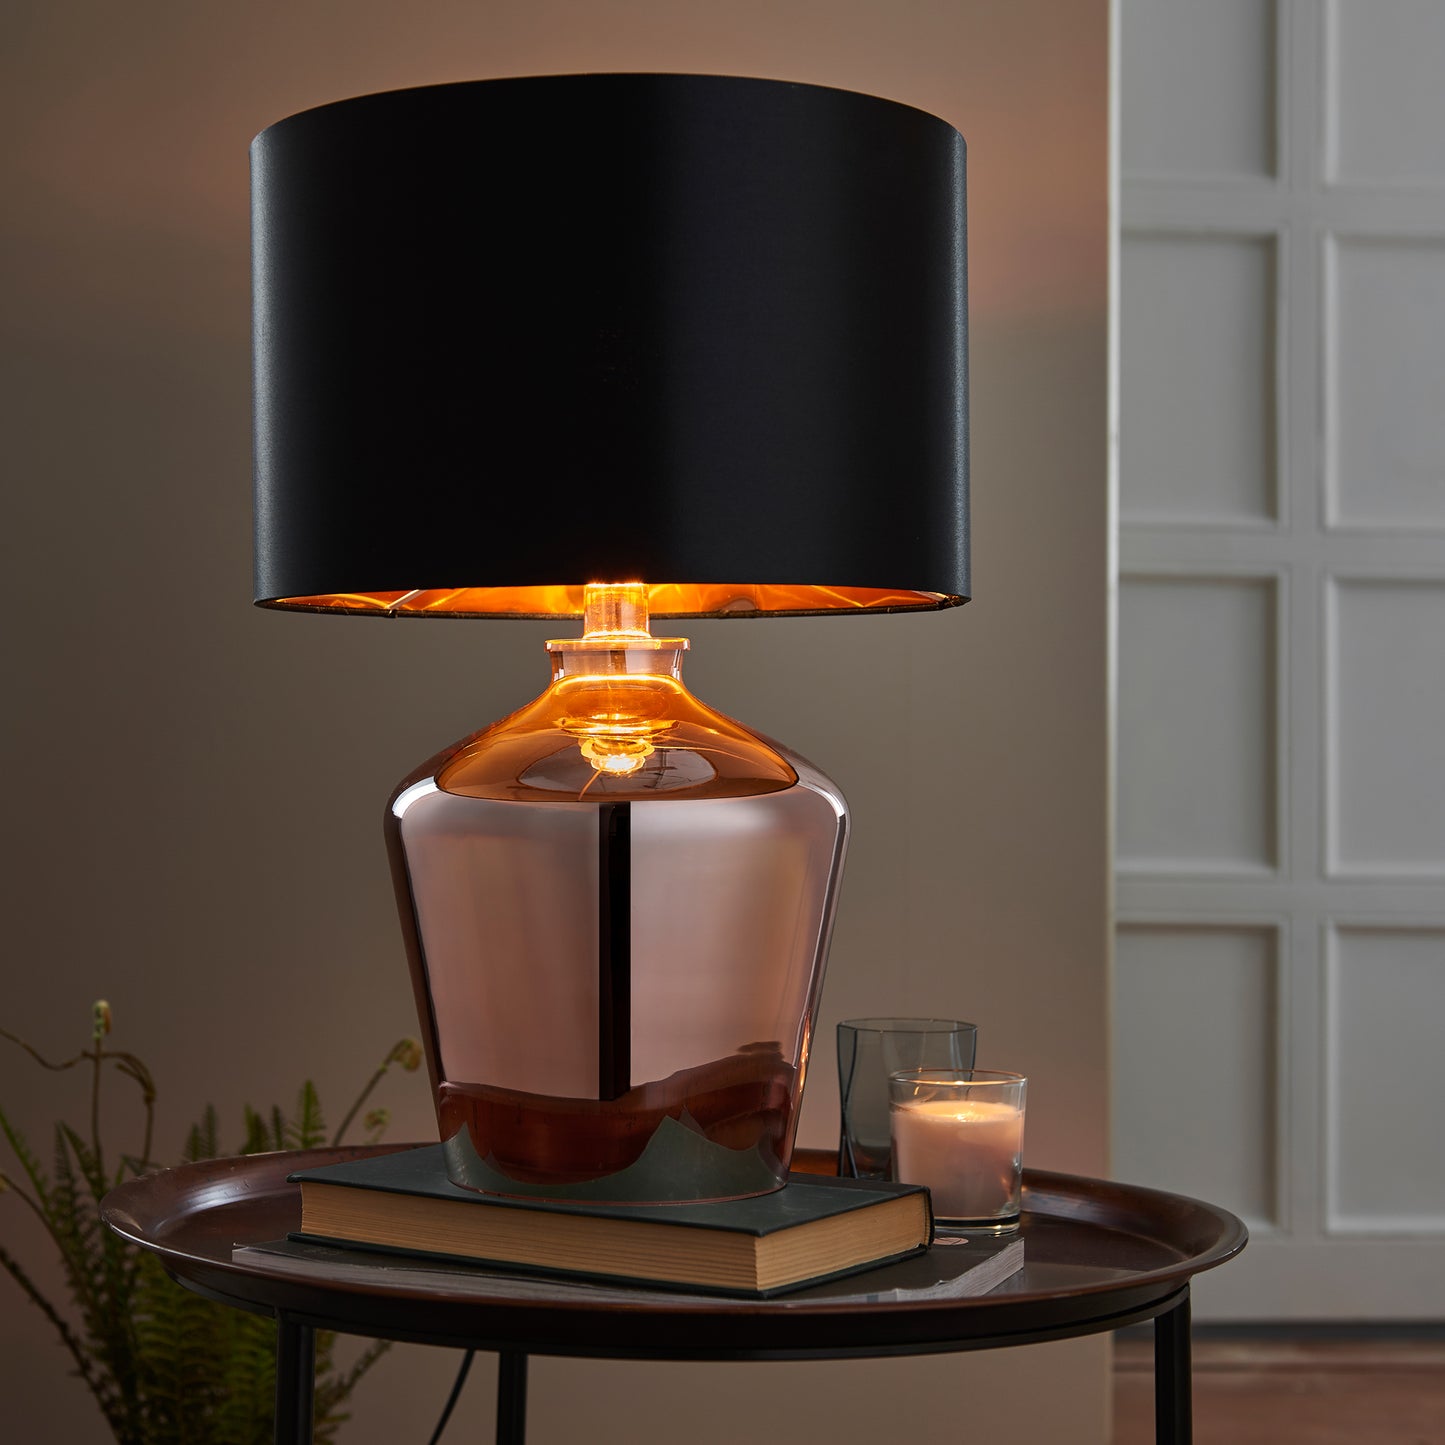 A copper table lamp with a black shade and a book, perfect for home interior decor.